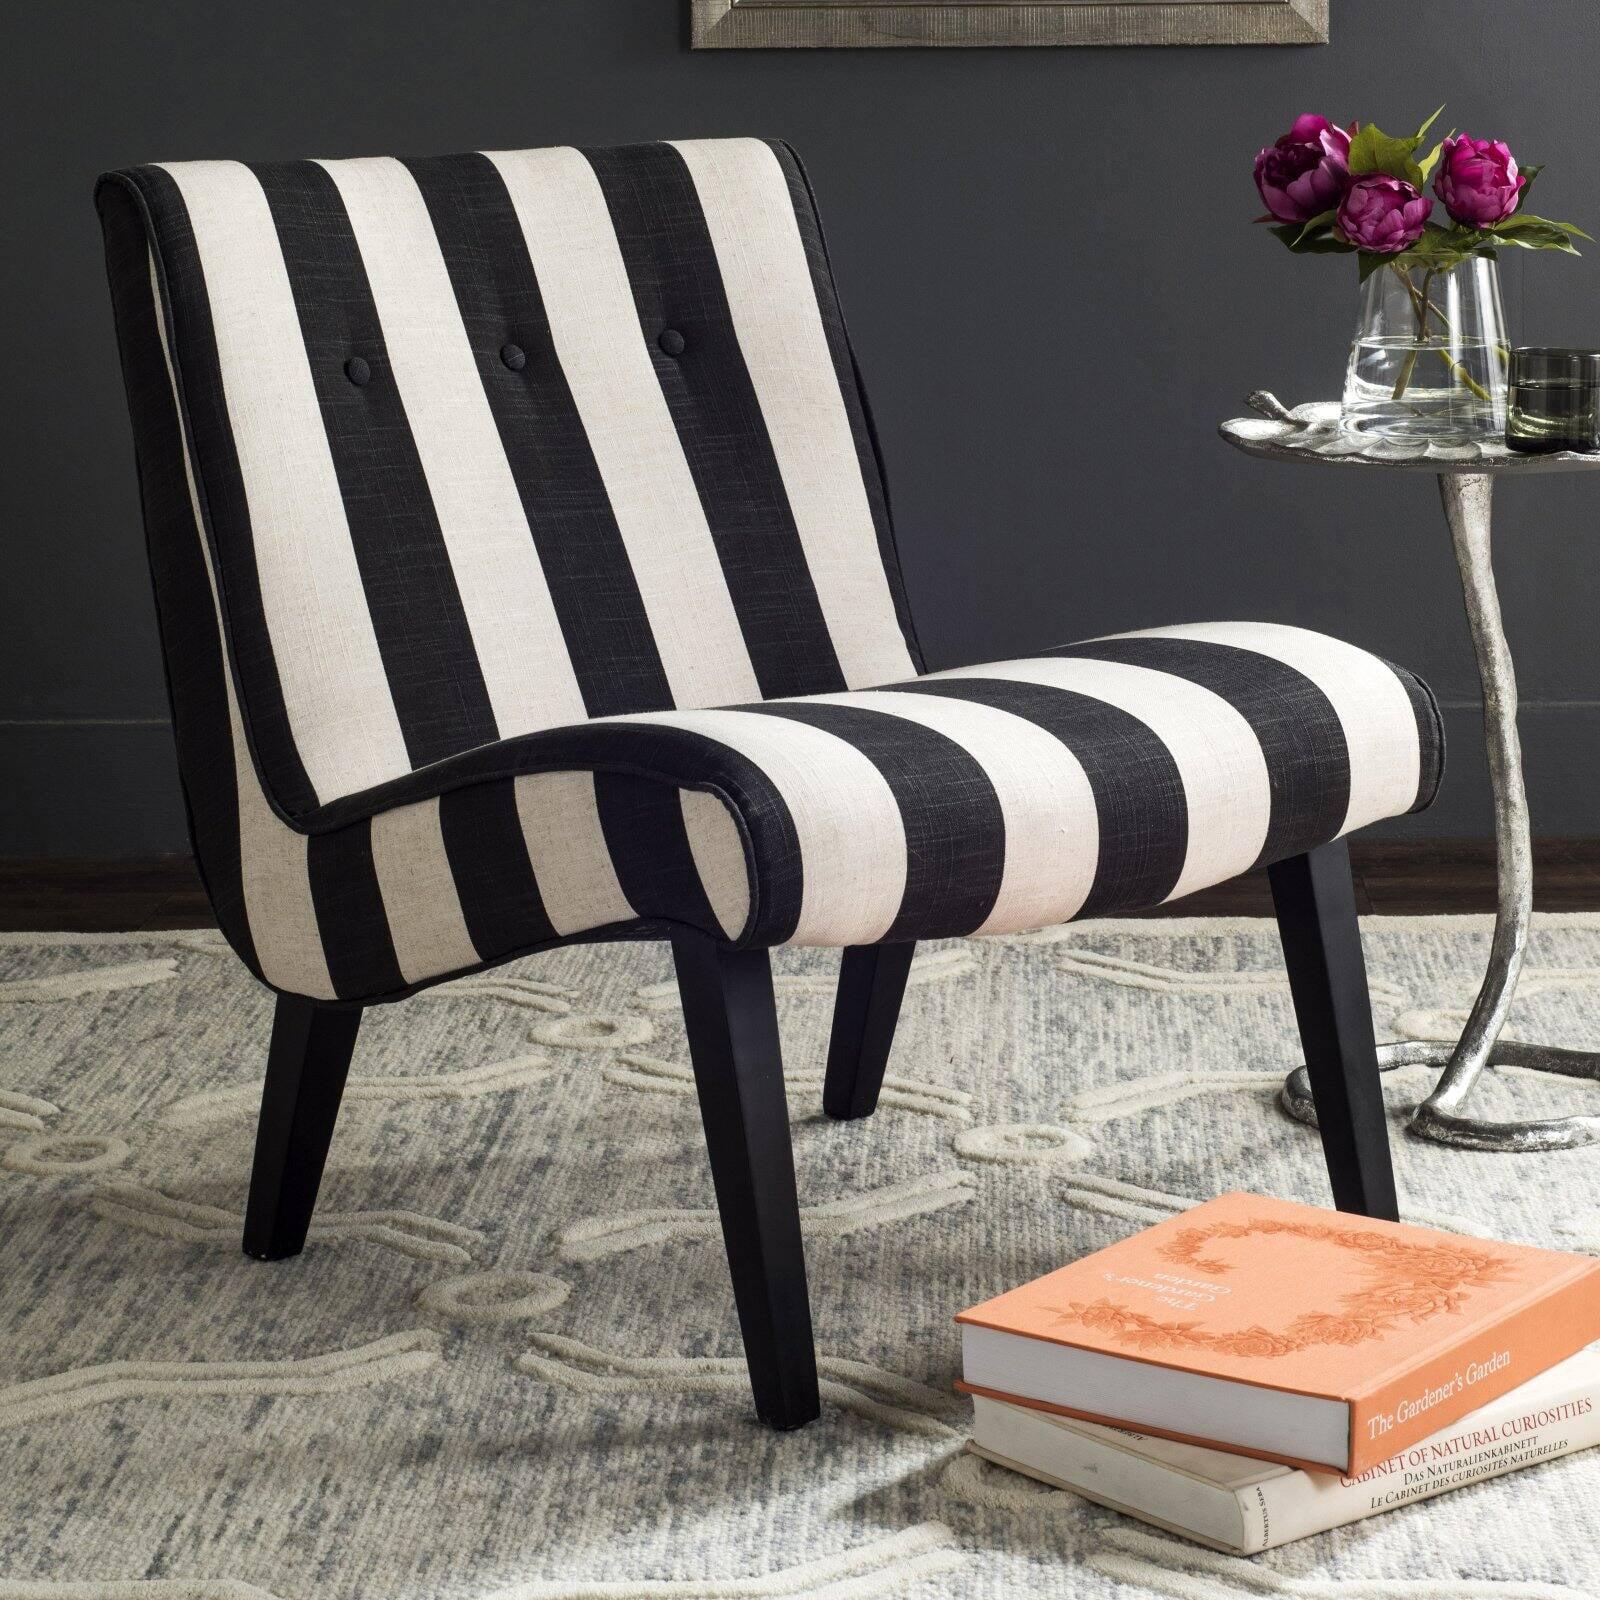 Transitional Black and White Spot Slipper Chair with Wood Legs